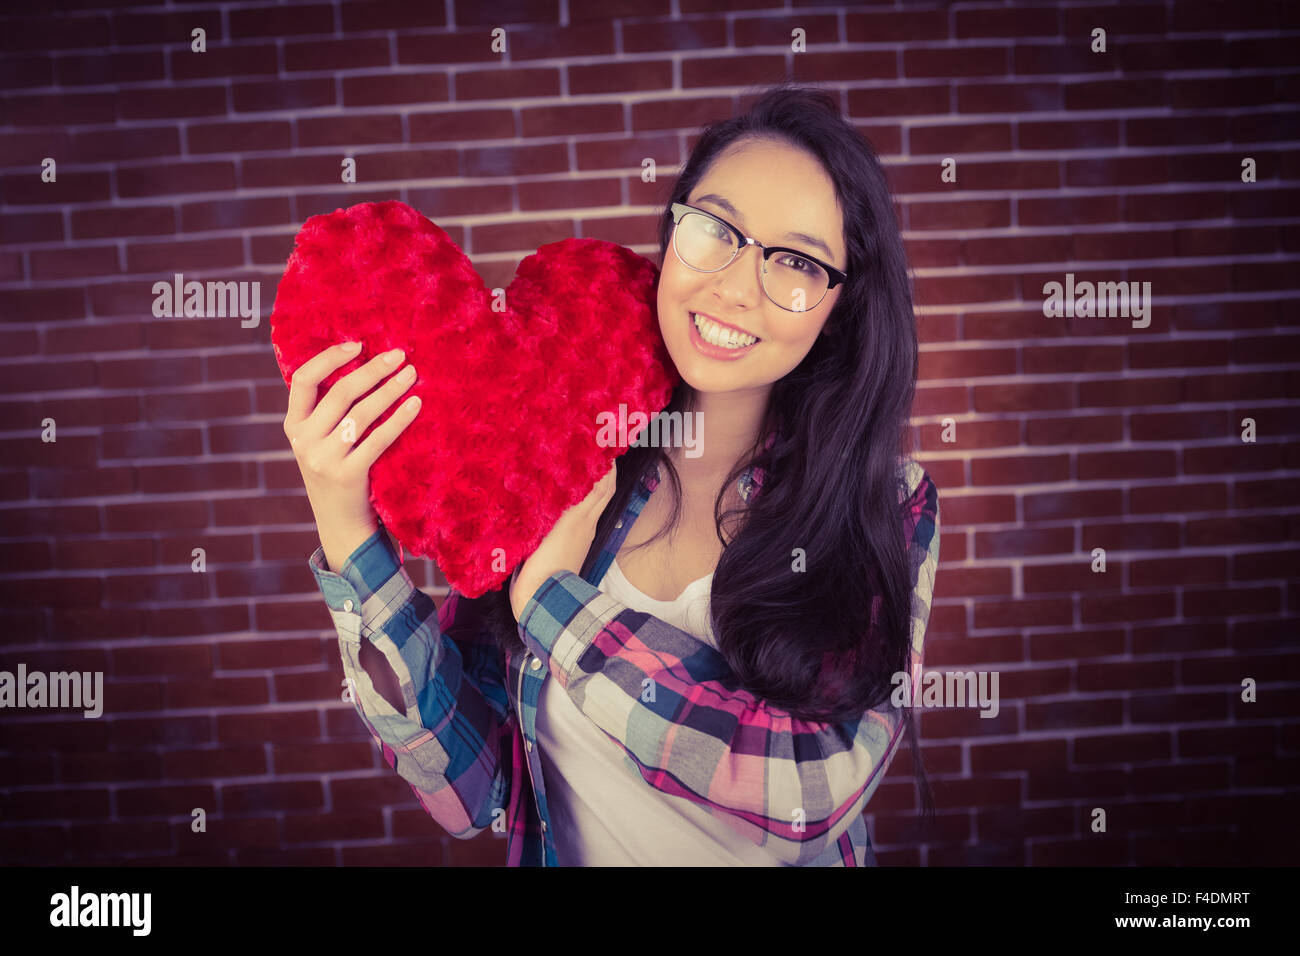 Attractive young woman holding up heart-shaped pillow Stock Photo